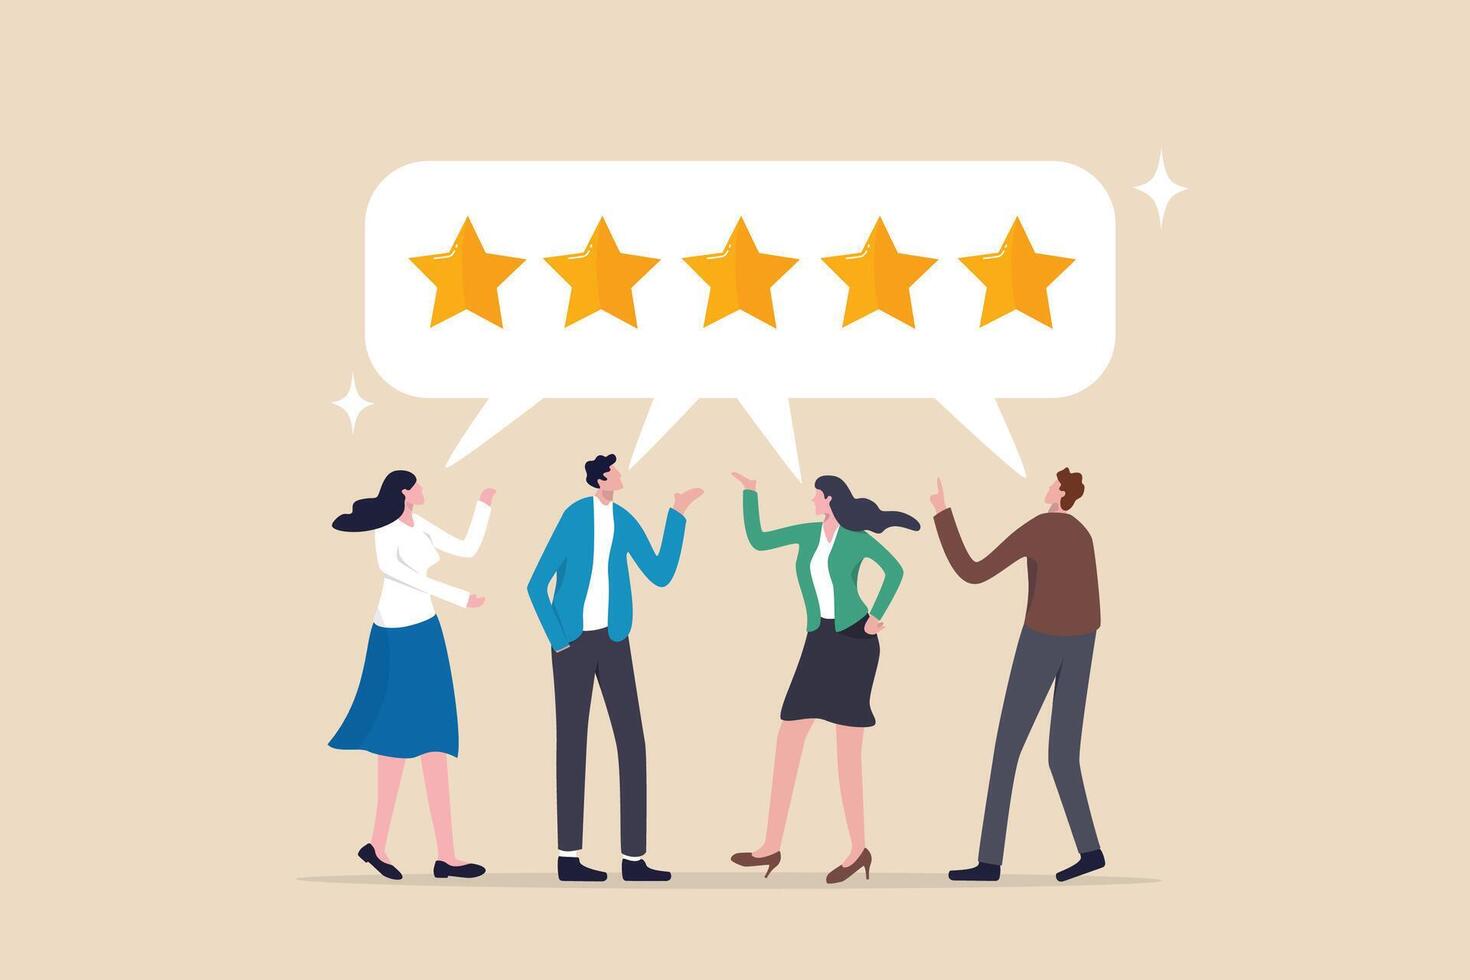 Customer loyalty, consumer satisfaction giving 5 stars rating feedback, best user experience or trust to use service again concept, various customer people giving 5 stars review for quality service. vector